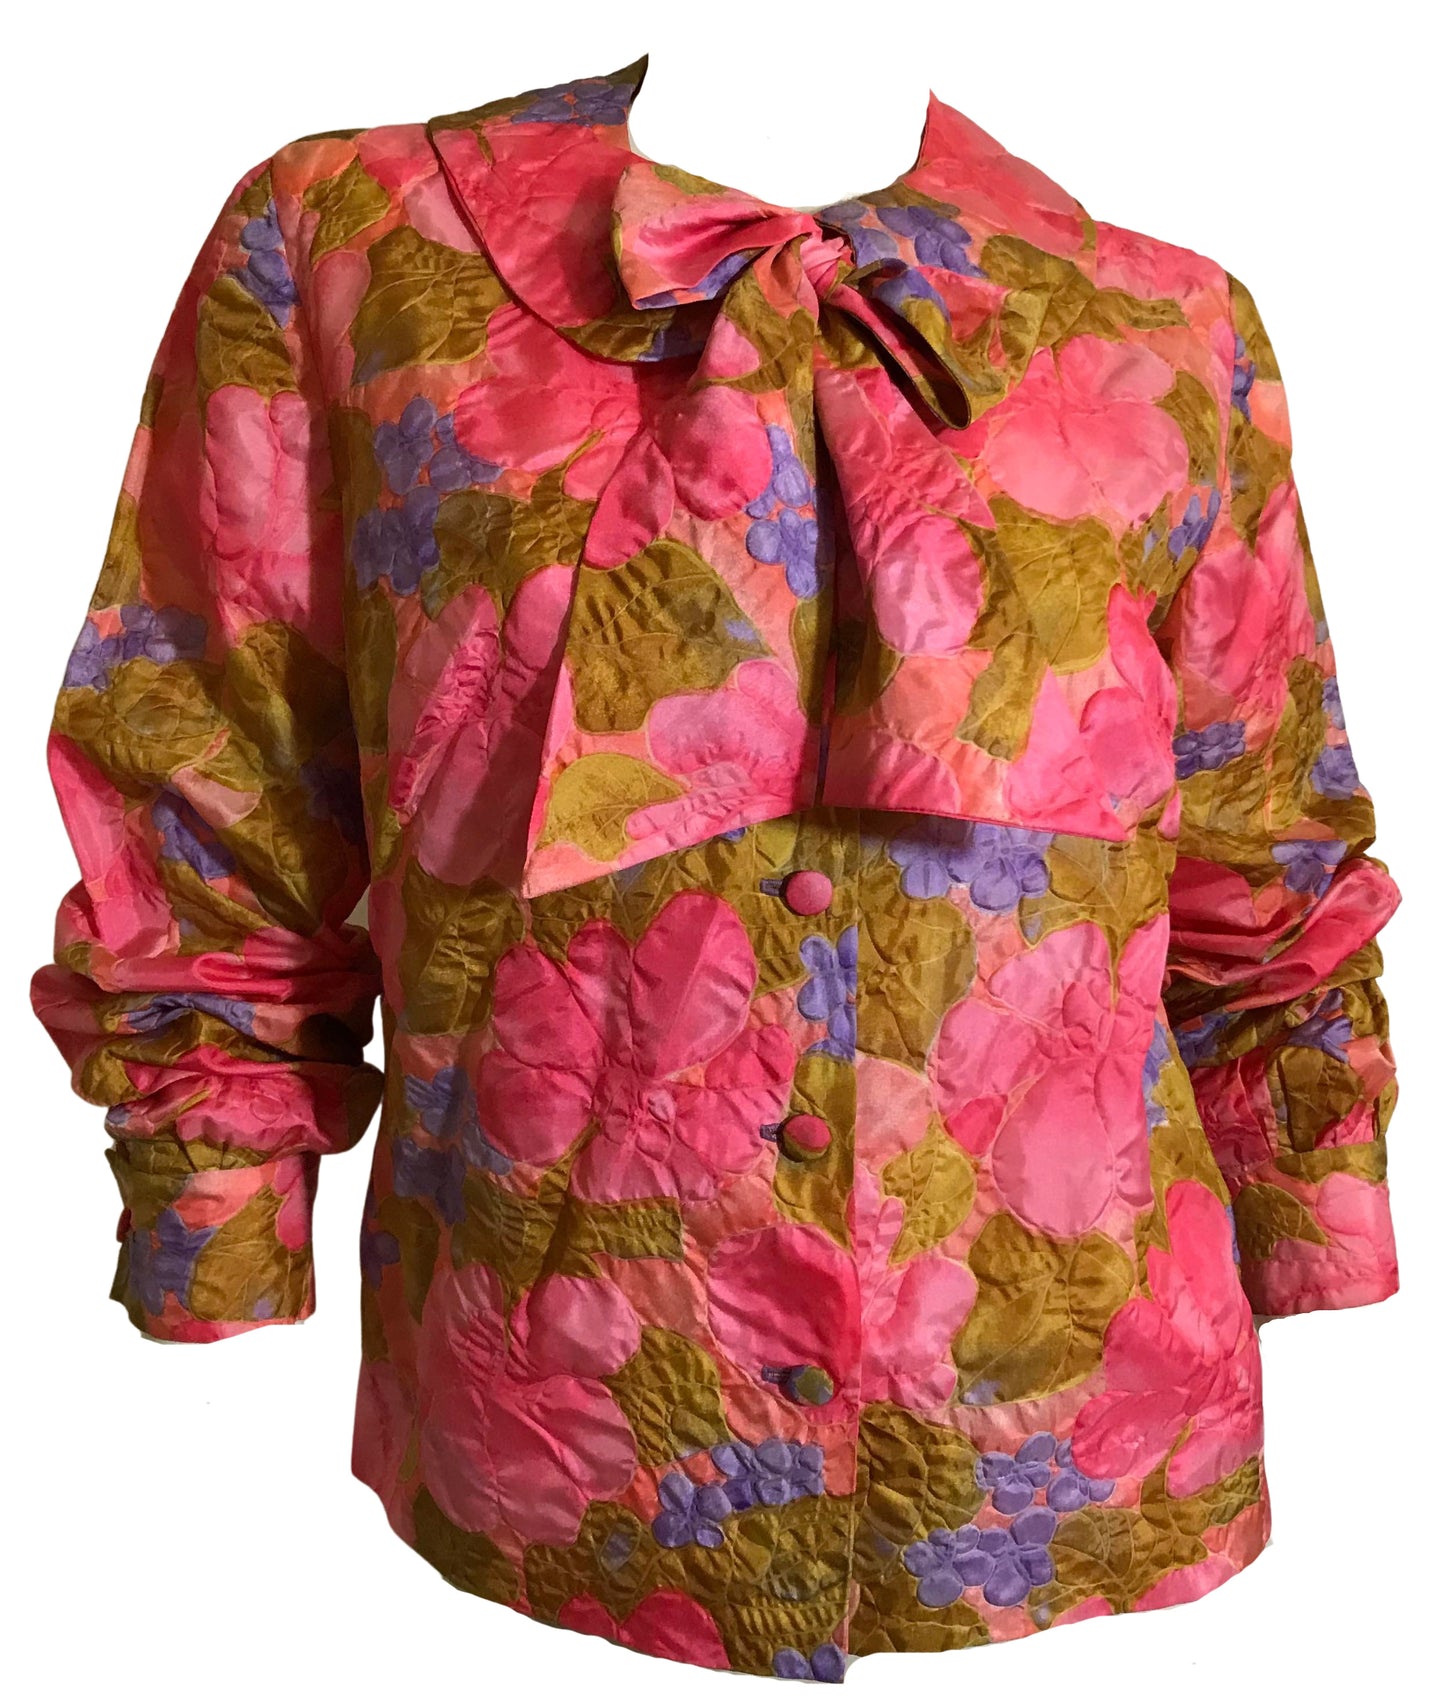 Electric Pink Textured Floral Print Blouse with Bow circa 1970s